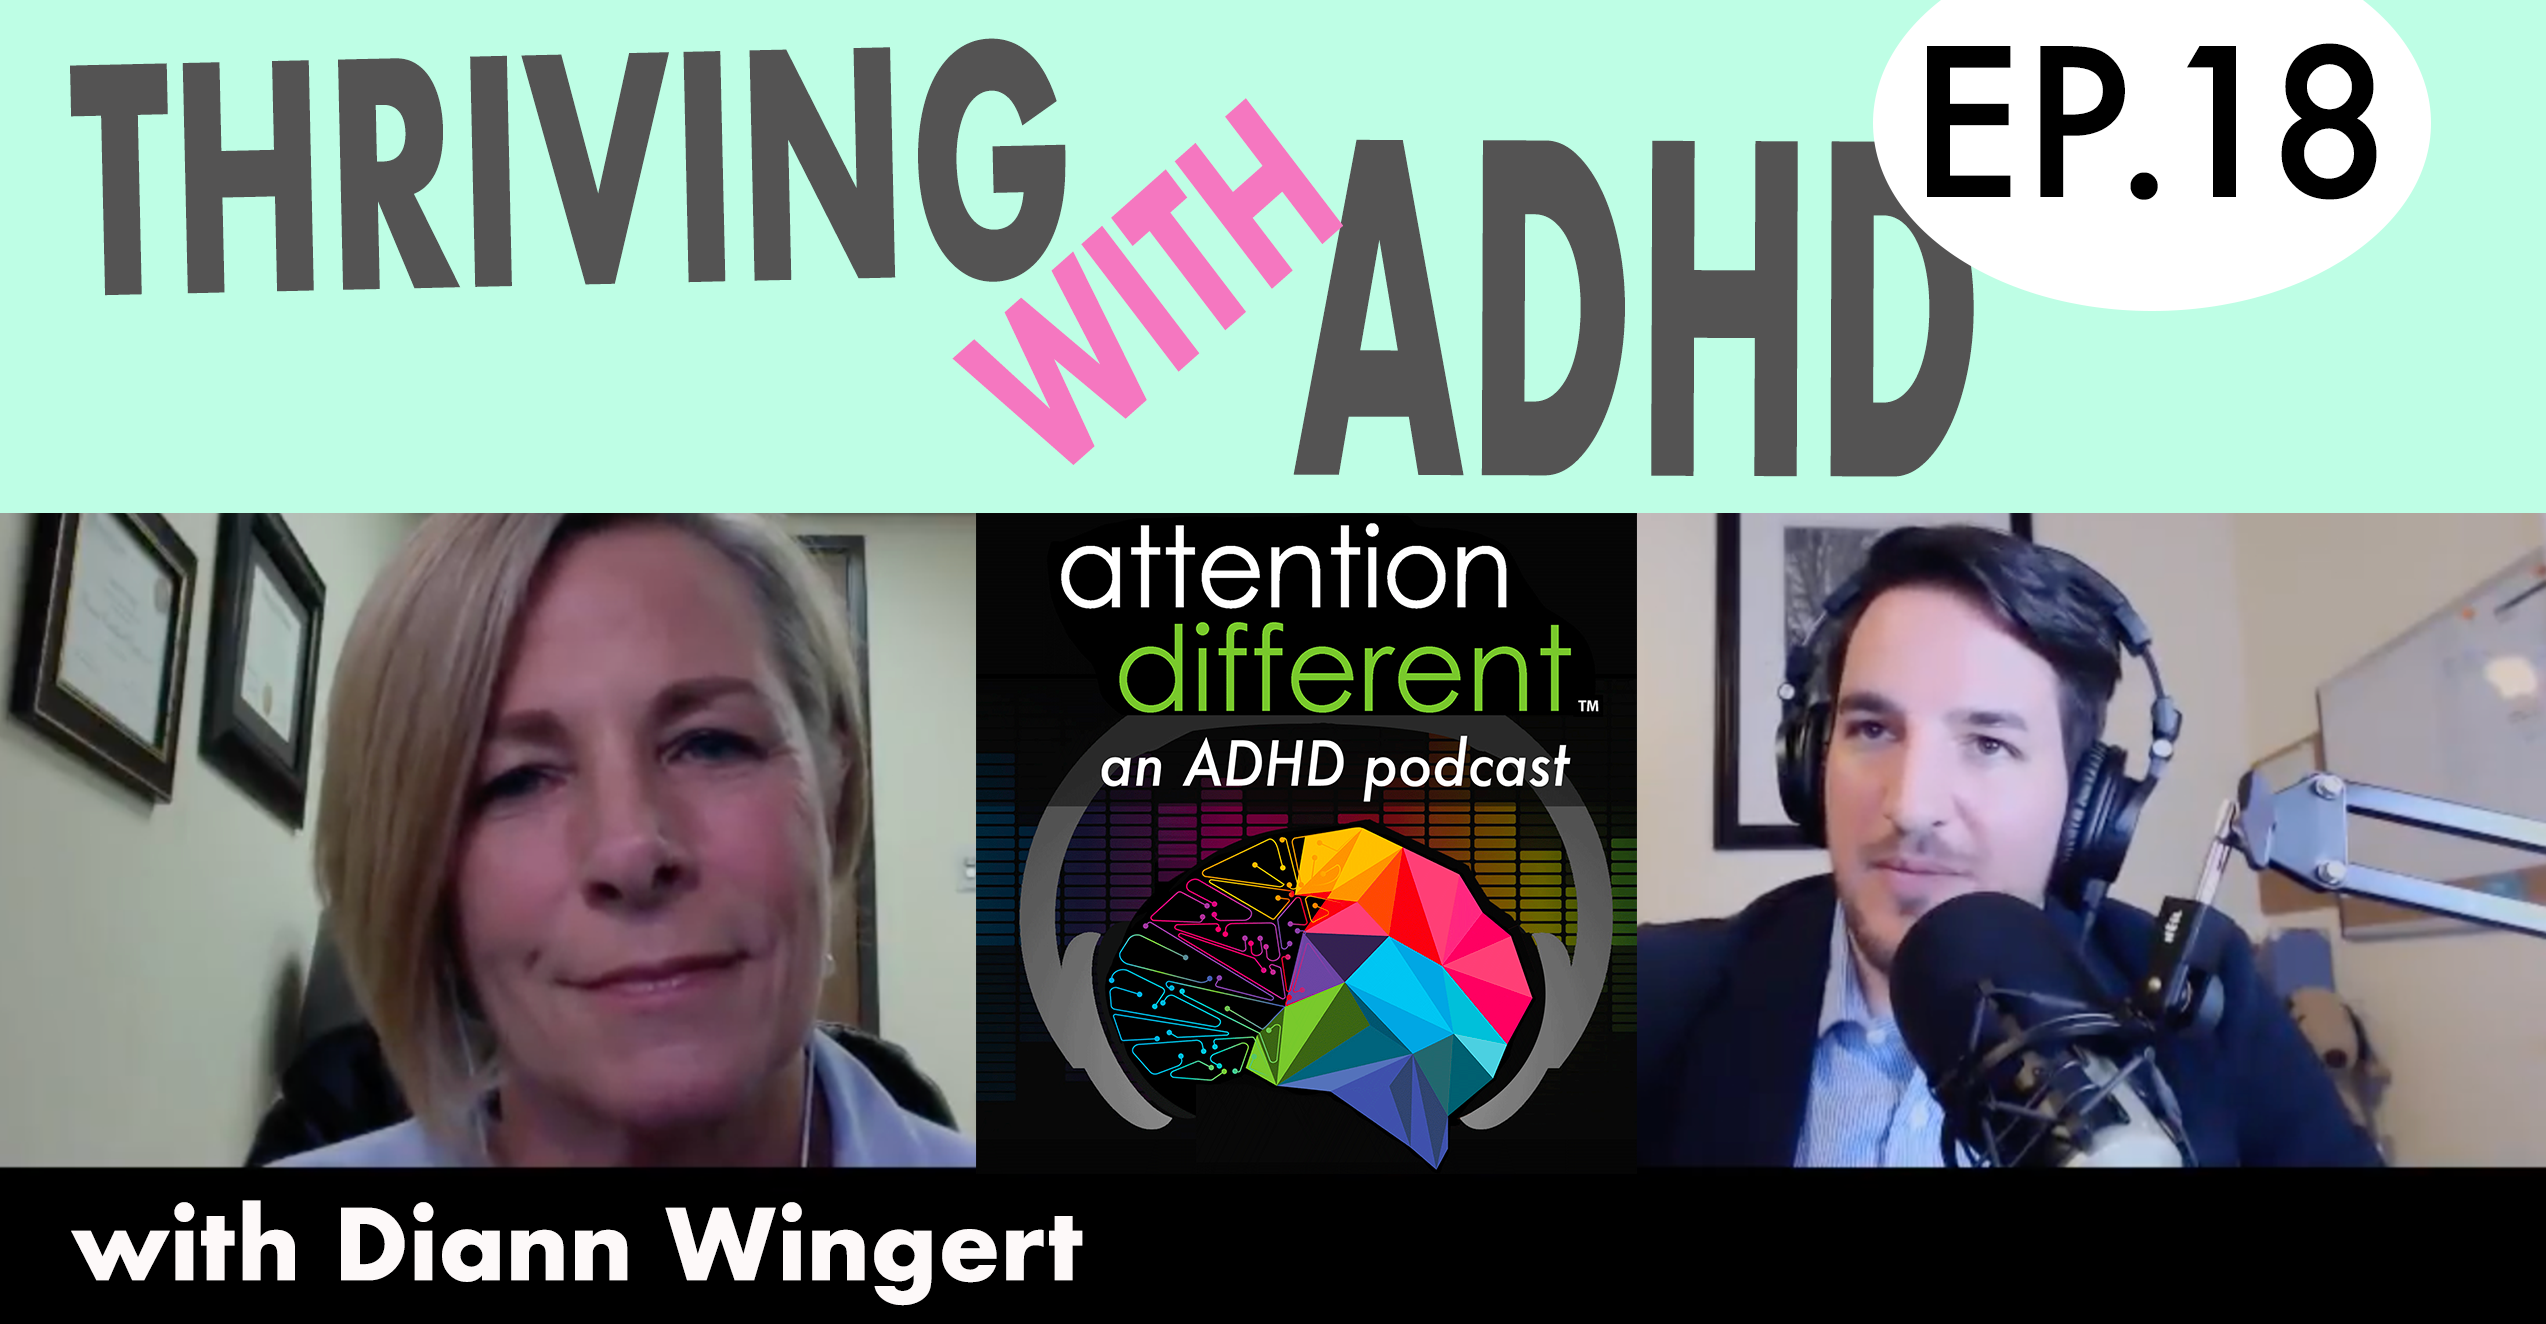 Attention Different - EP 18 Thriving with ADHD